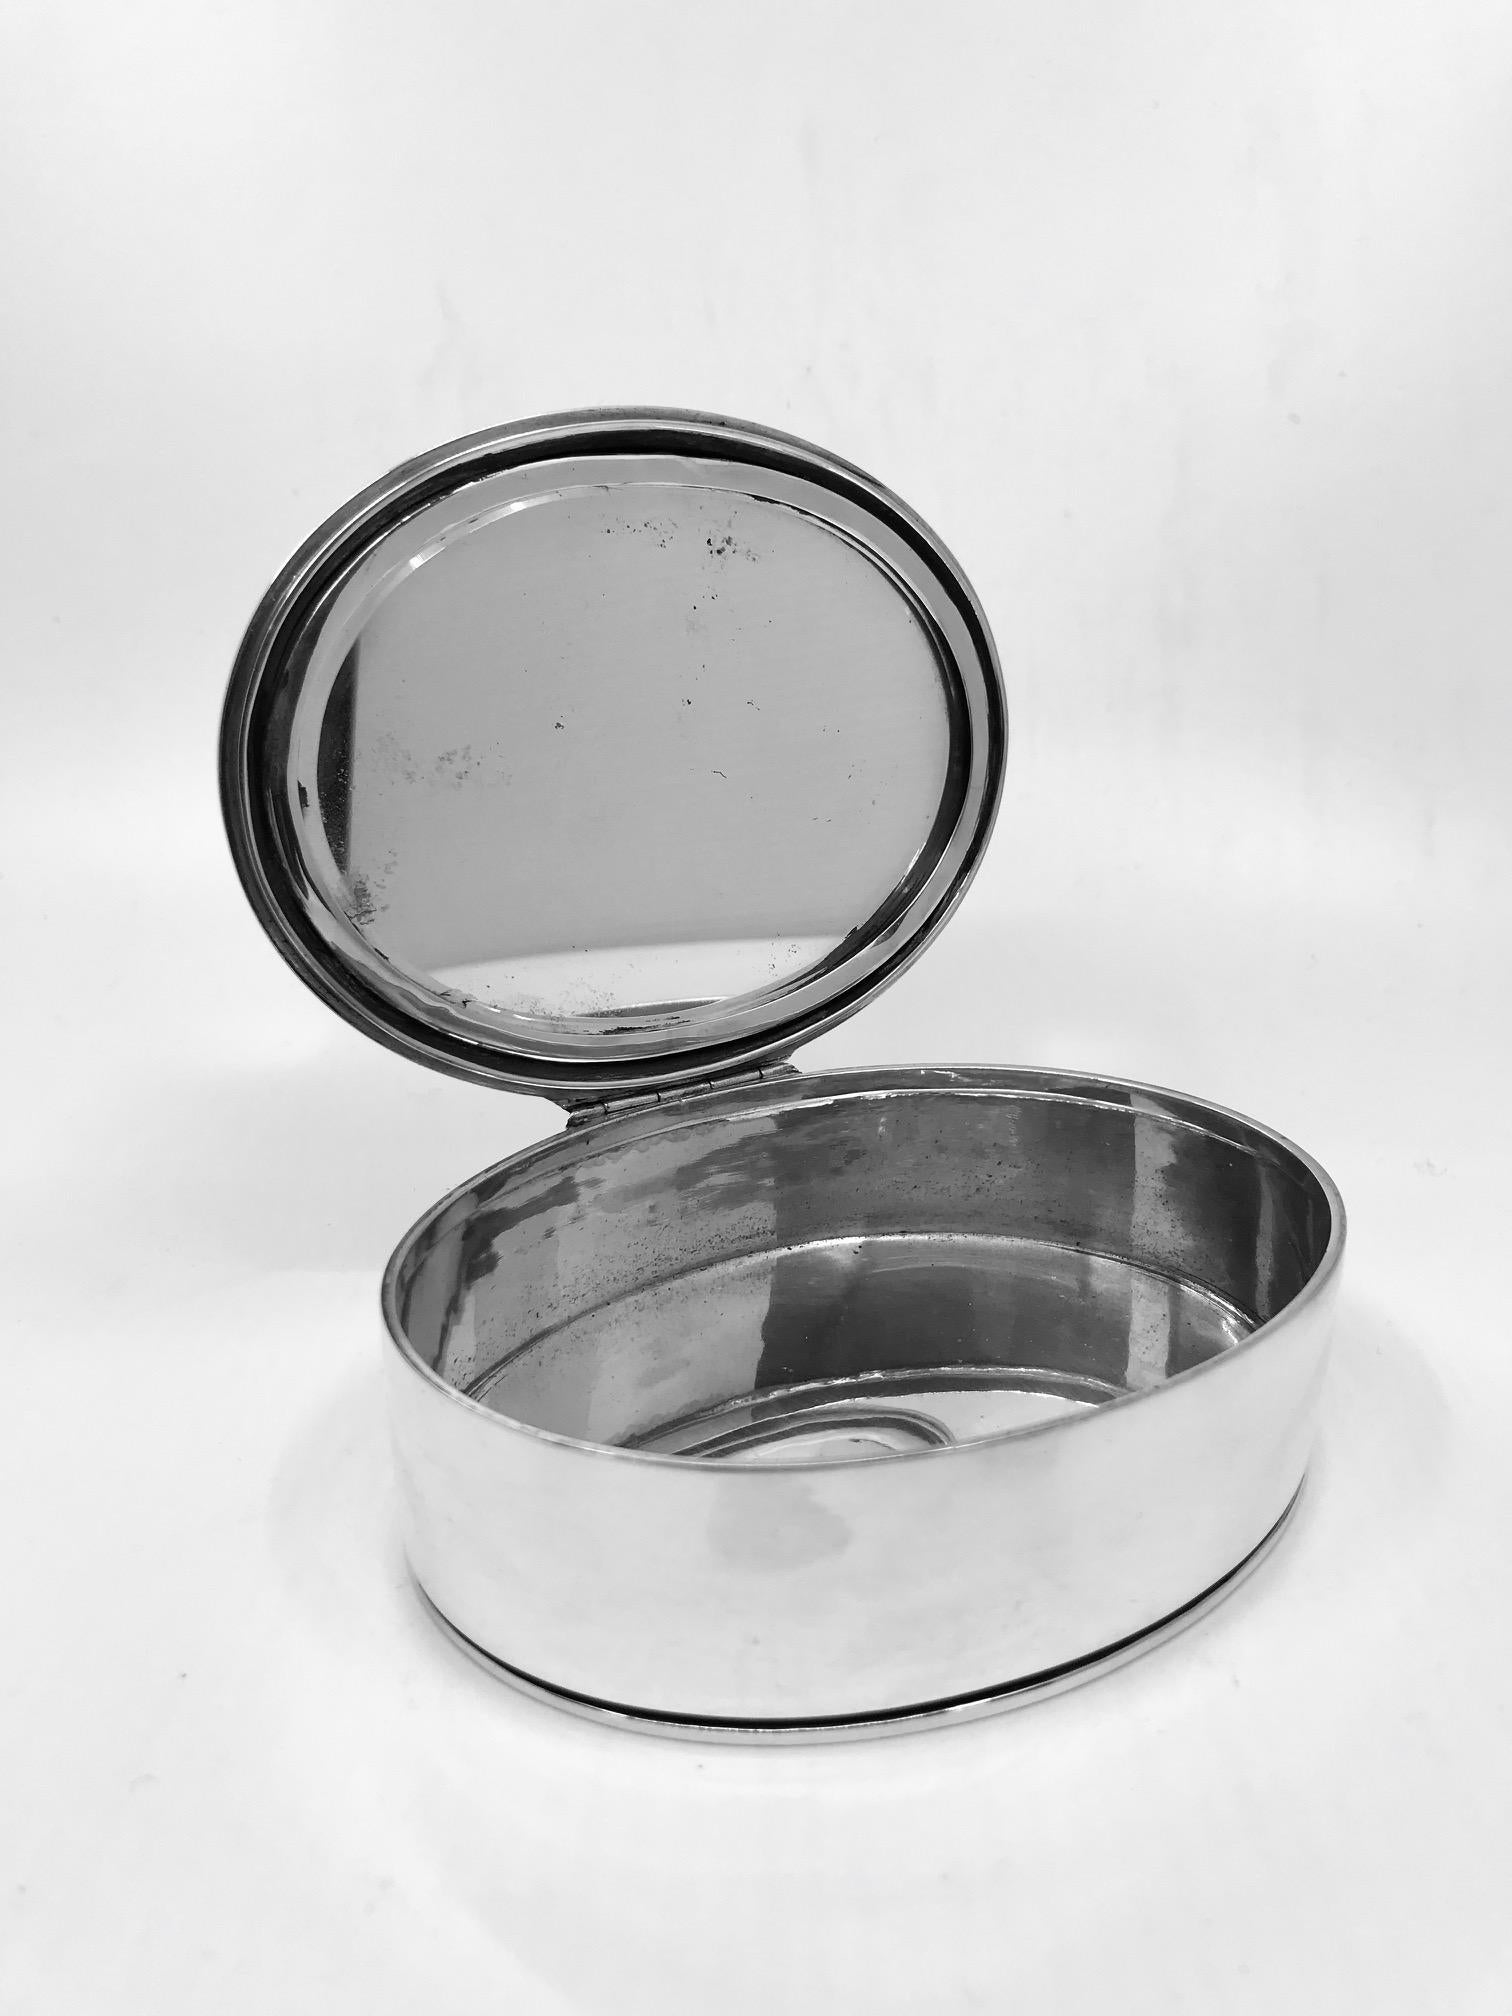 Hammered Vintage Georg Jensen Jewelry Box 150g by Harald Nielsen For Sale